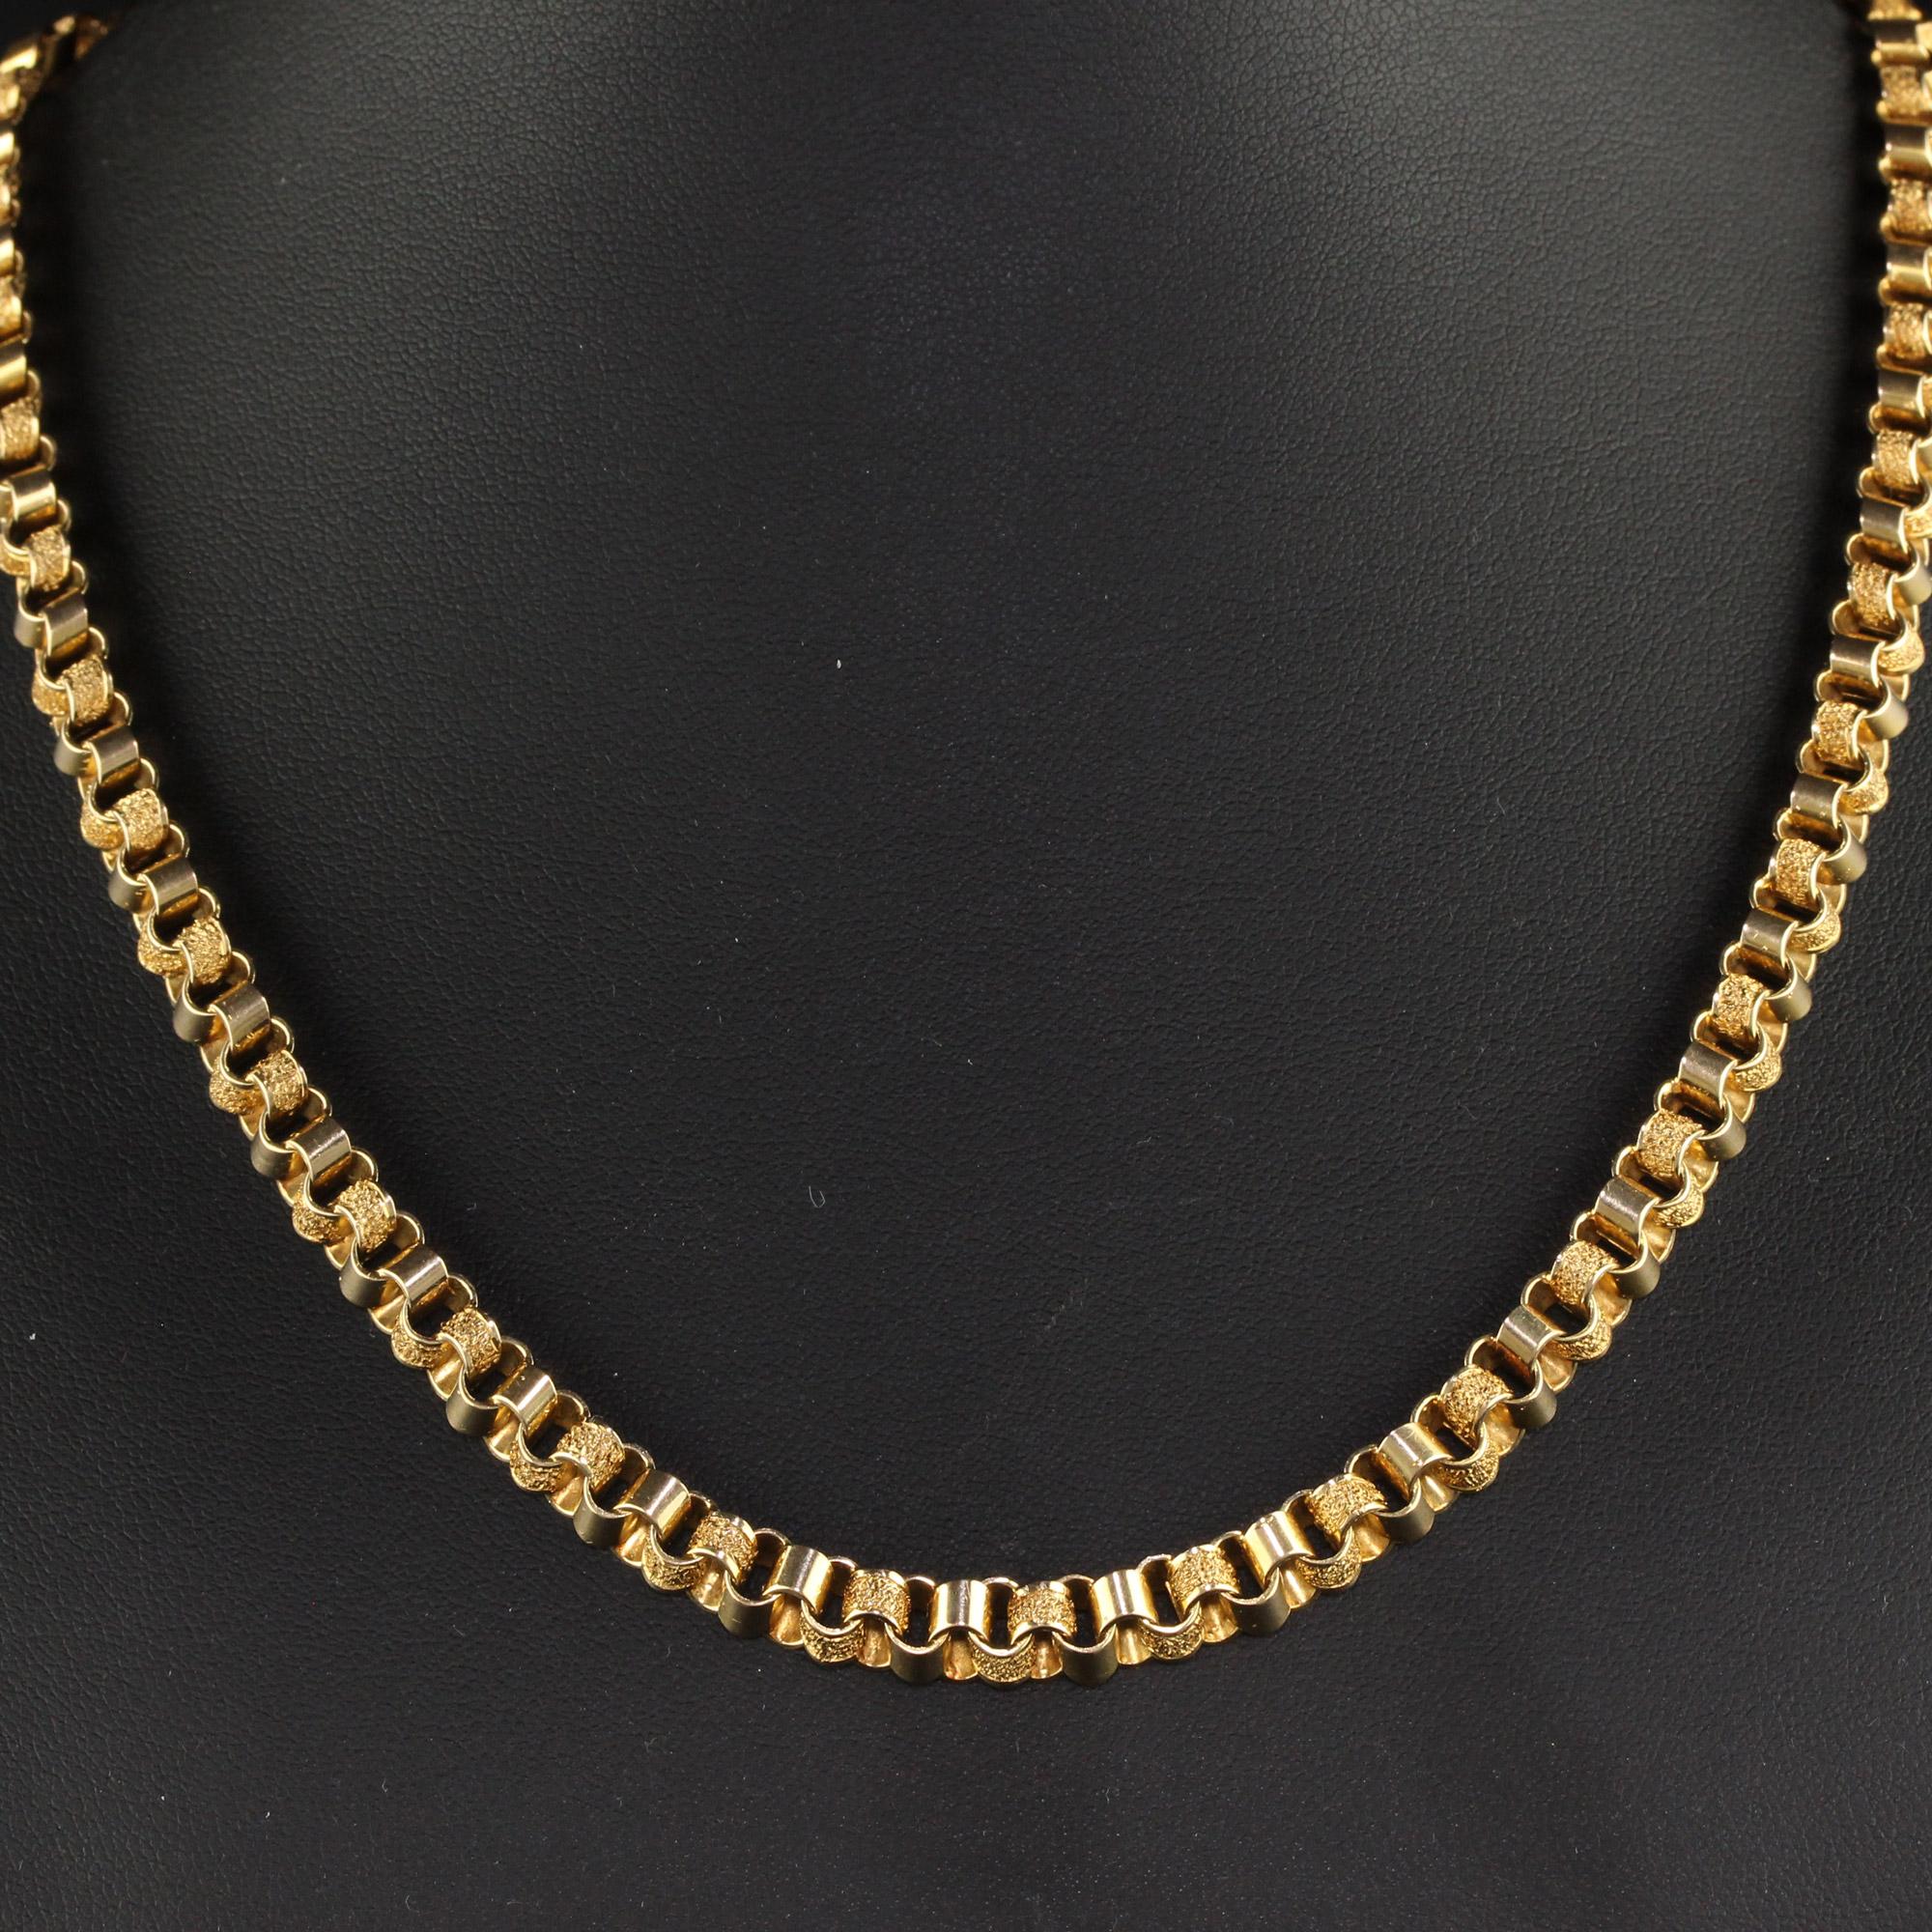 Antique Art Deco 14K Yellow Gold Flat Geometric Link Chain Necklace In Good Condition For Sale In Great Neck, NY